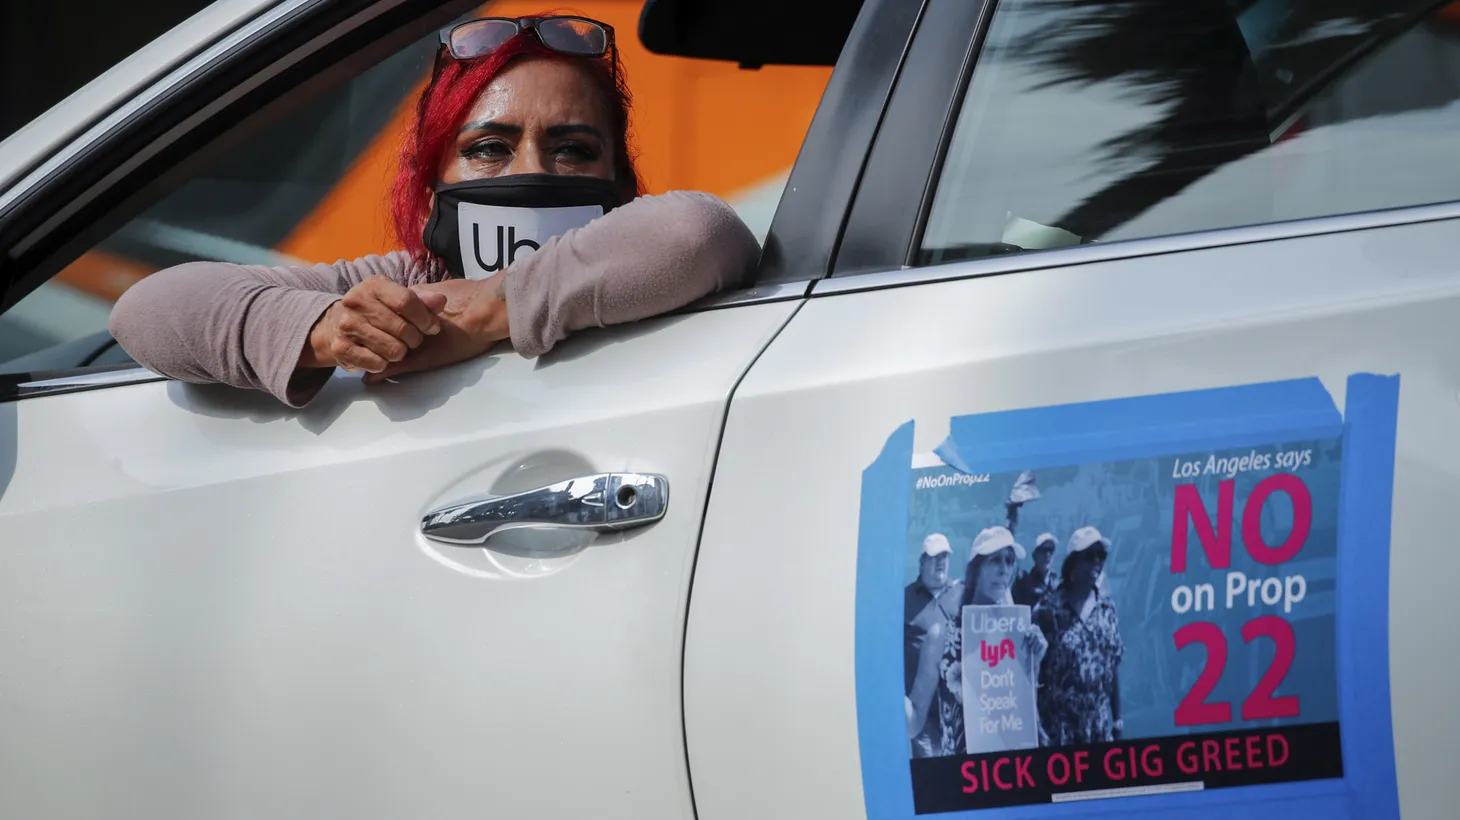 App-based gig worker Terresa Mercado participates in a demonstration outside Los Angeles City Hall to urge voters to vote no on Proposition 22, a November ballot measure that would classify app-based drivers as independent contractors and not employees or agents, in Los Angeles, California, U.S., October 8, 2020.